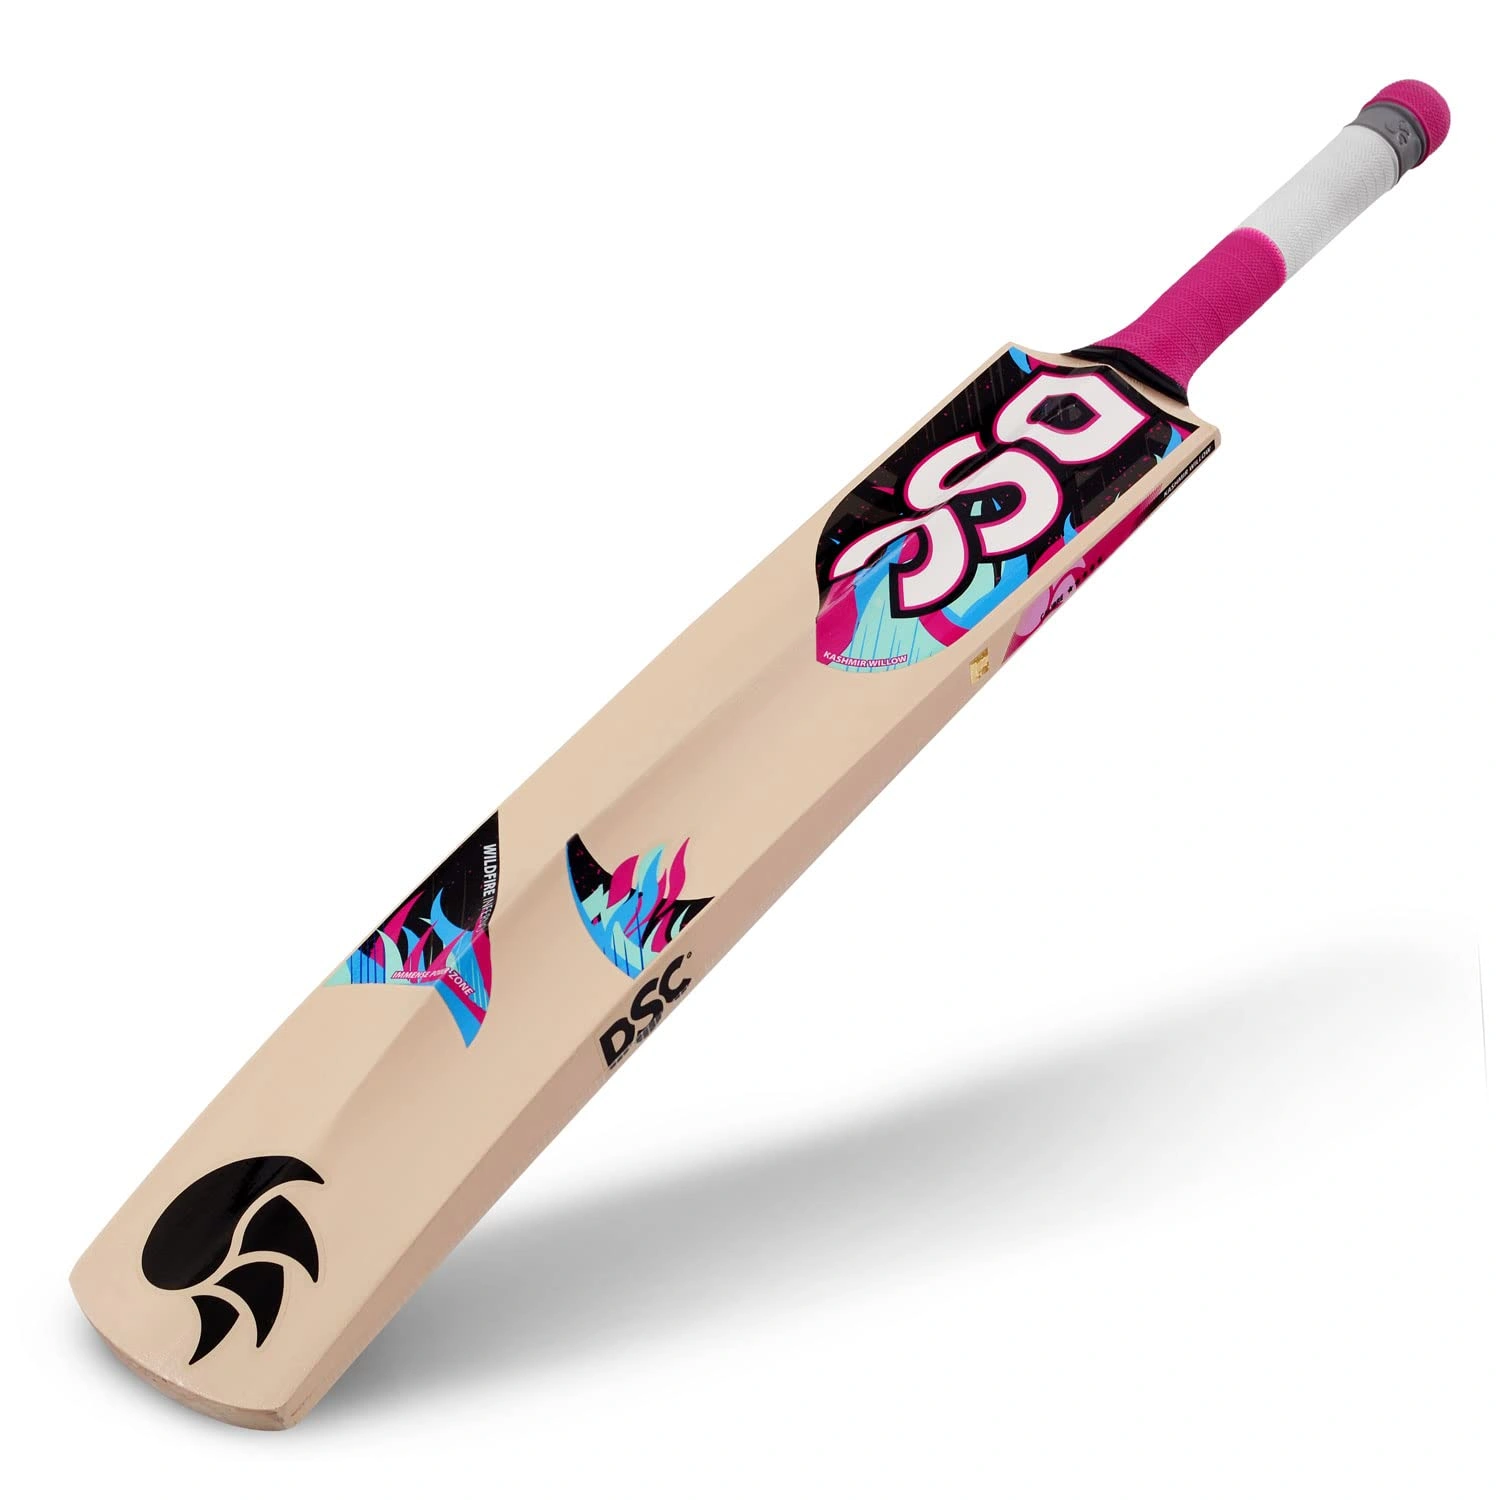 DSC WildFire Inferno Kashmir Willow Cricket Bat for Tennis Ball Cricket: Lightweight and Powerful for Dynamic Play-FS-2